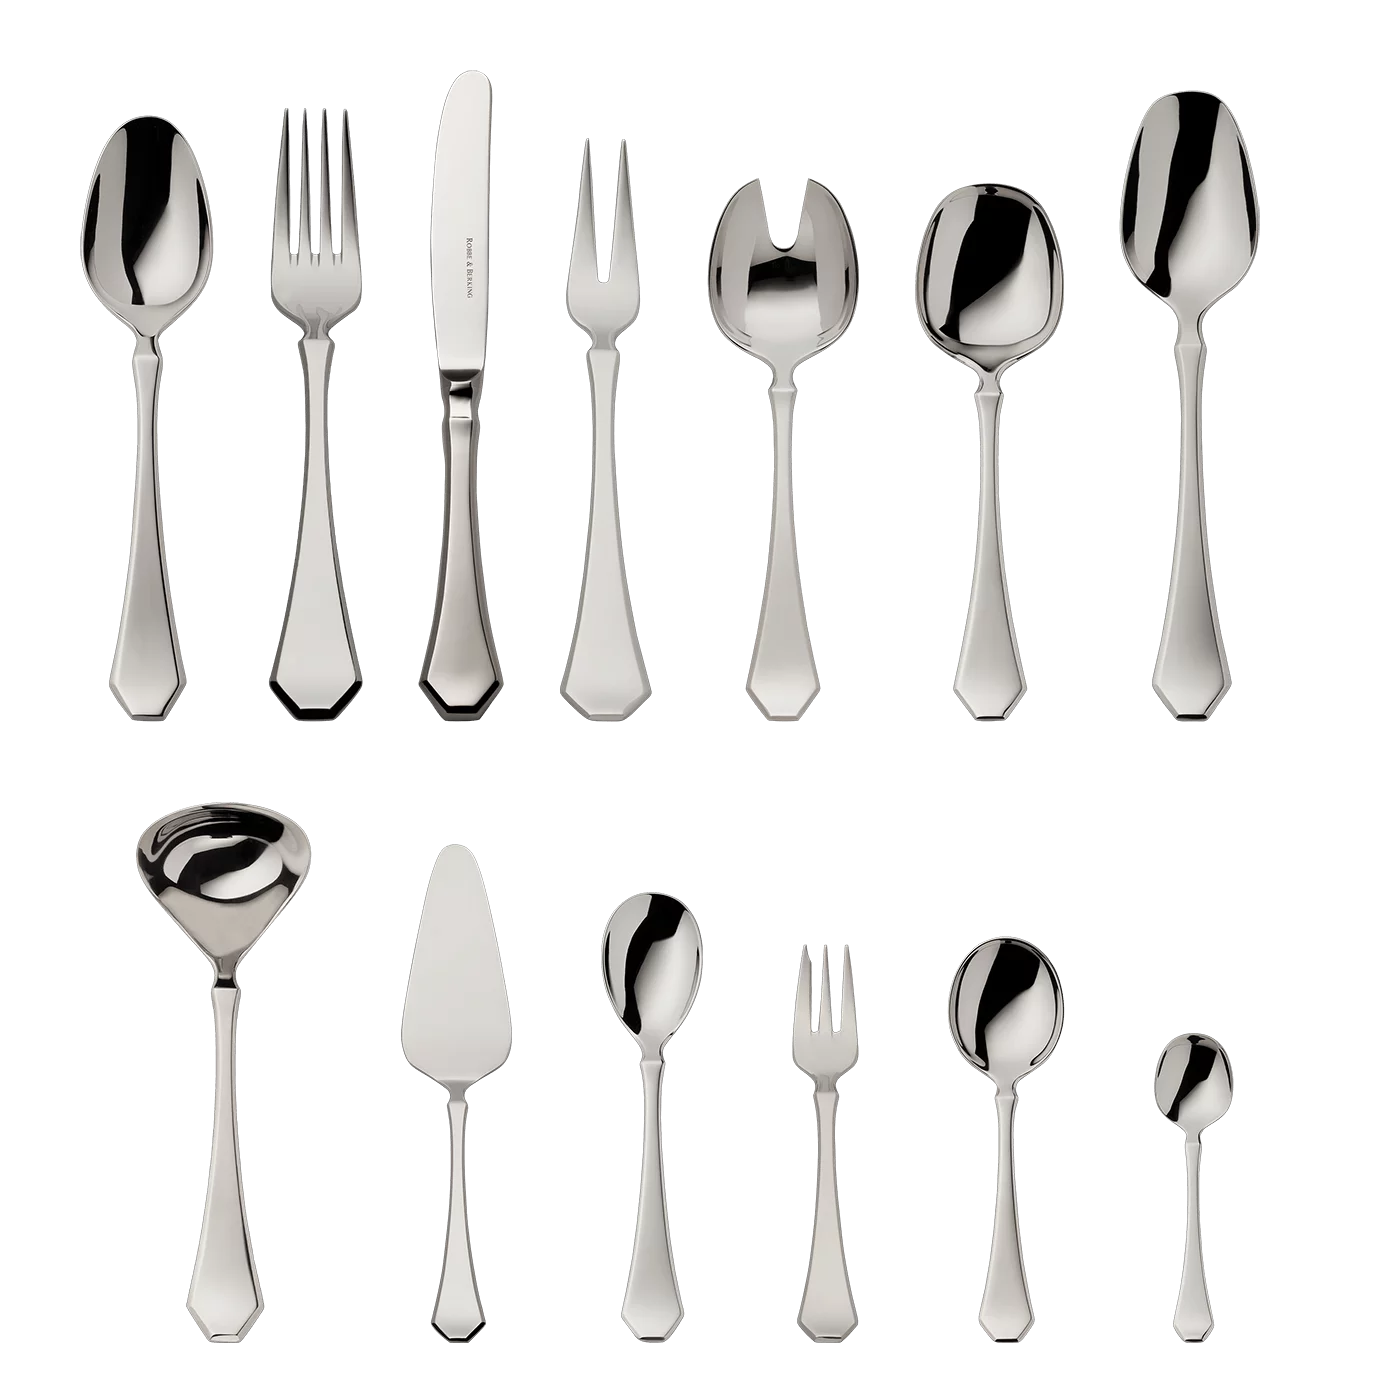 Baltic 40-piece set (18/8 stainless steel)